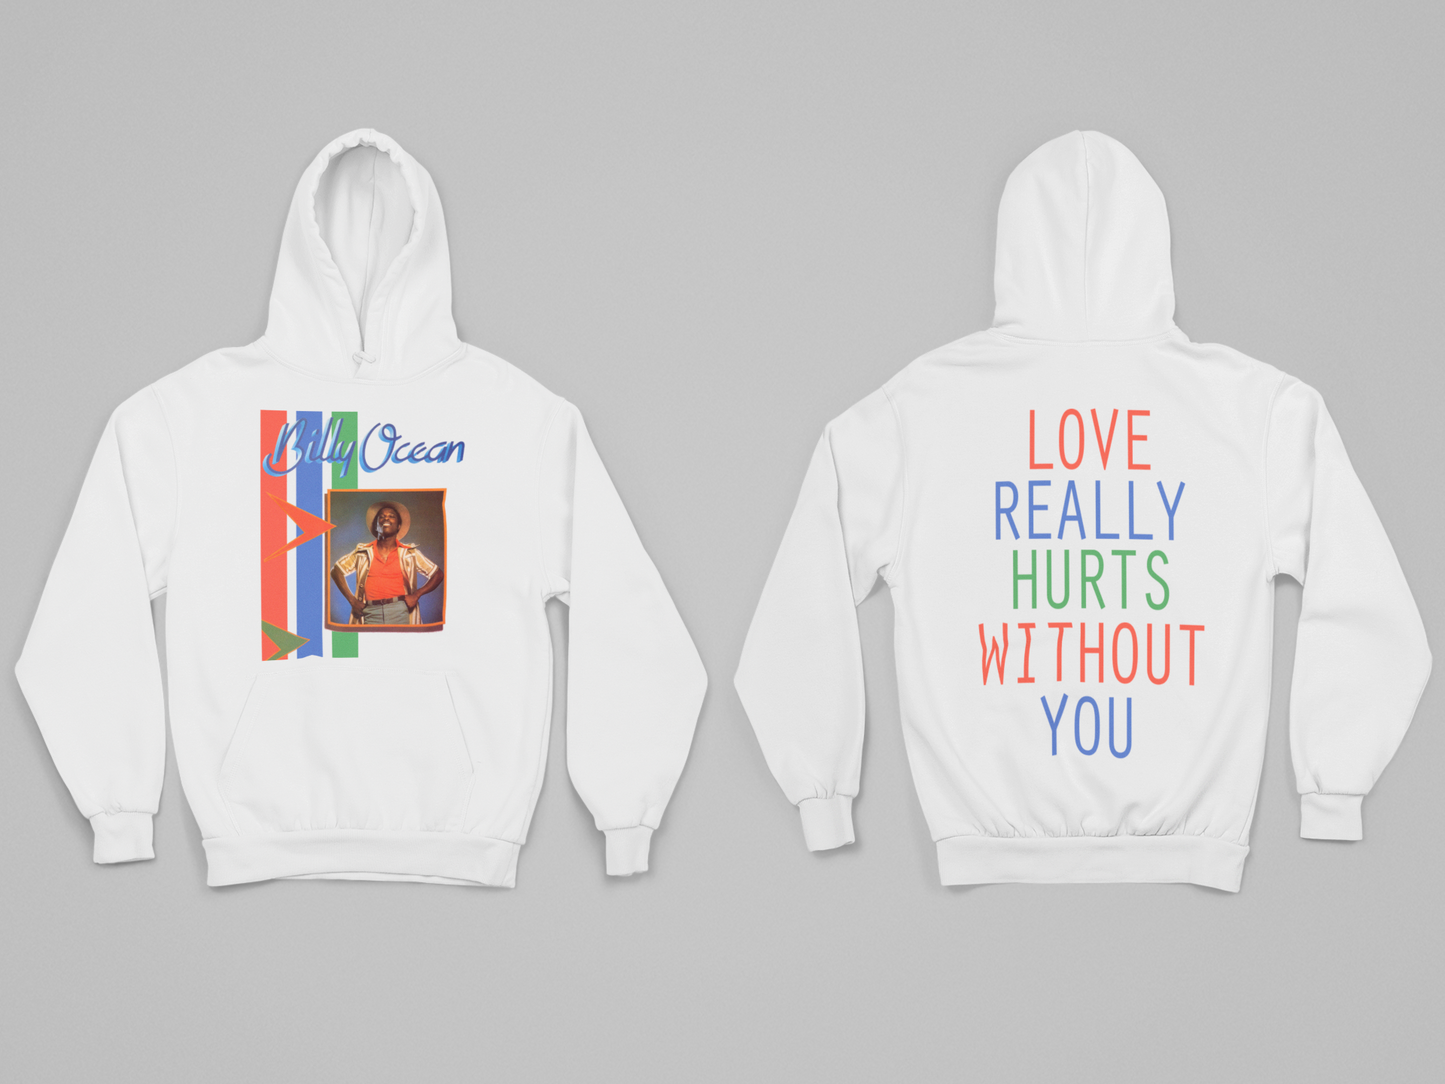 'BILLY OCEAN' - EXPLODED HOODIE FRONT AND BACK PRINT